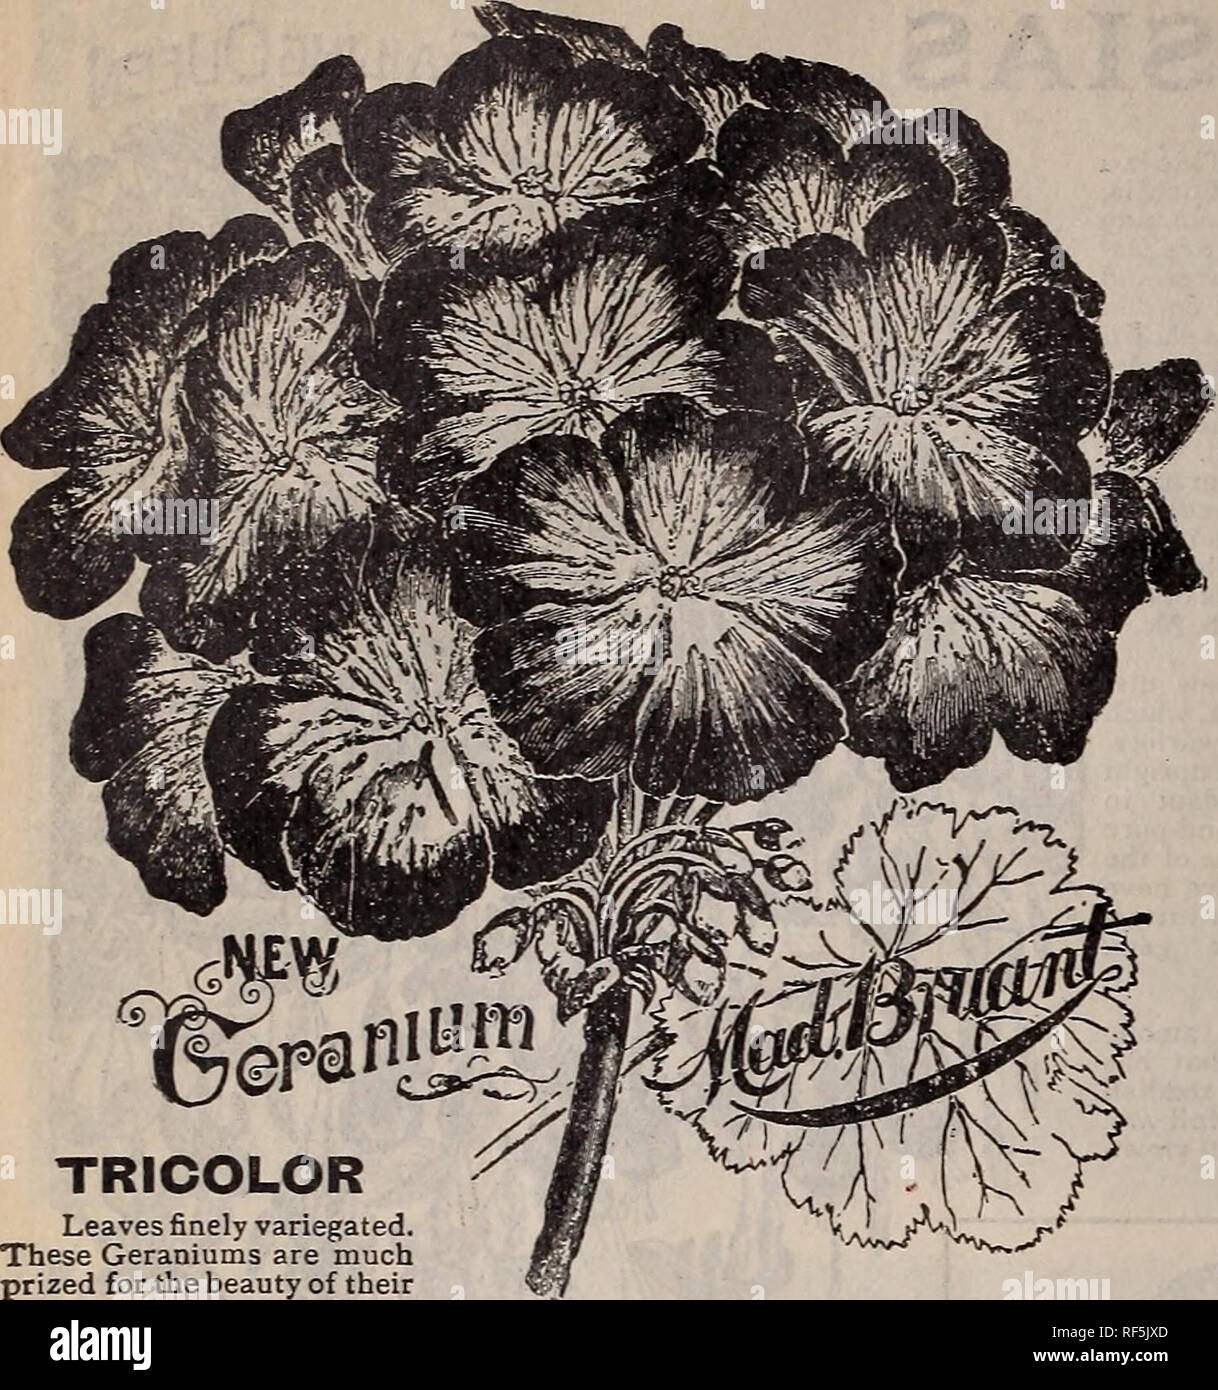 . Catalogue : 1902. Nursery stock Ontario Toronto Catalogs; Vegetables Seeds Catalogs; Flowers Seeds Catalogs; Plants, Ornamental Catalogs; Bulbs (Plants) Catalogs; Fruit Catalogs; Agricultural implements Catalogs. 76 The Steele, Briggs Seed Co., Limited, Toronto. TRICOLOR Leaves finely variegated. These Geraniums are much -prized for the beauty of their â foliage, which is very hand- some. For culture in the house or conservatory they are among the best. Geranium, Mrs. Pollock. Leaves bright bronzy red zone, belted with crimson and edged with golden yellow. A beautiful variety. Plants, each,  Stock Photo